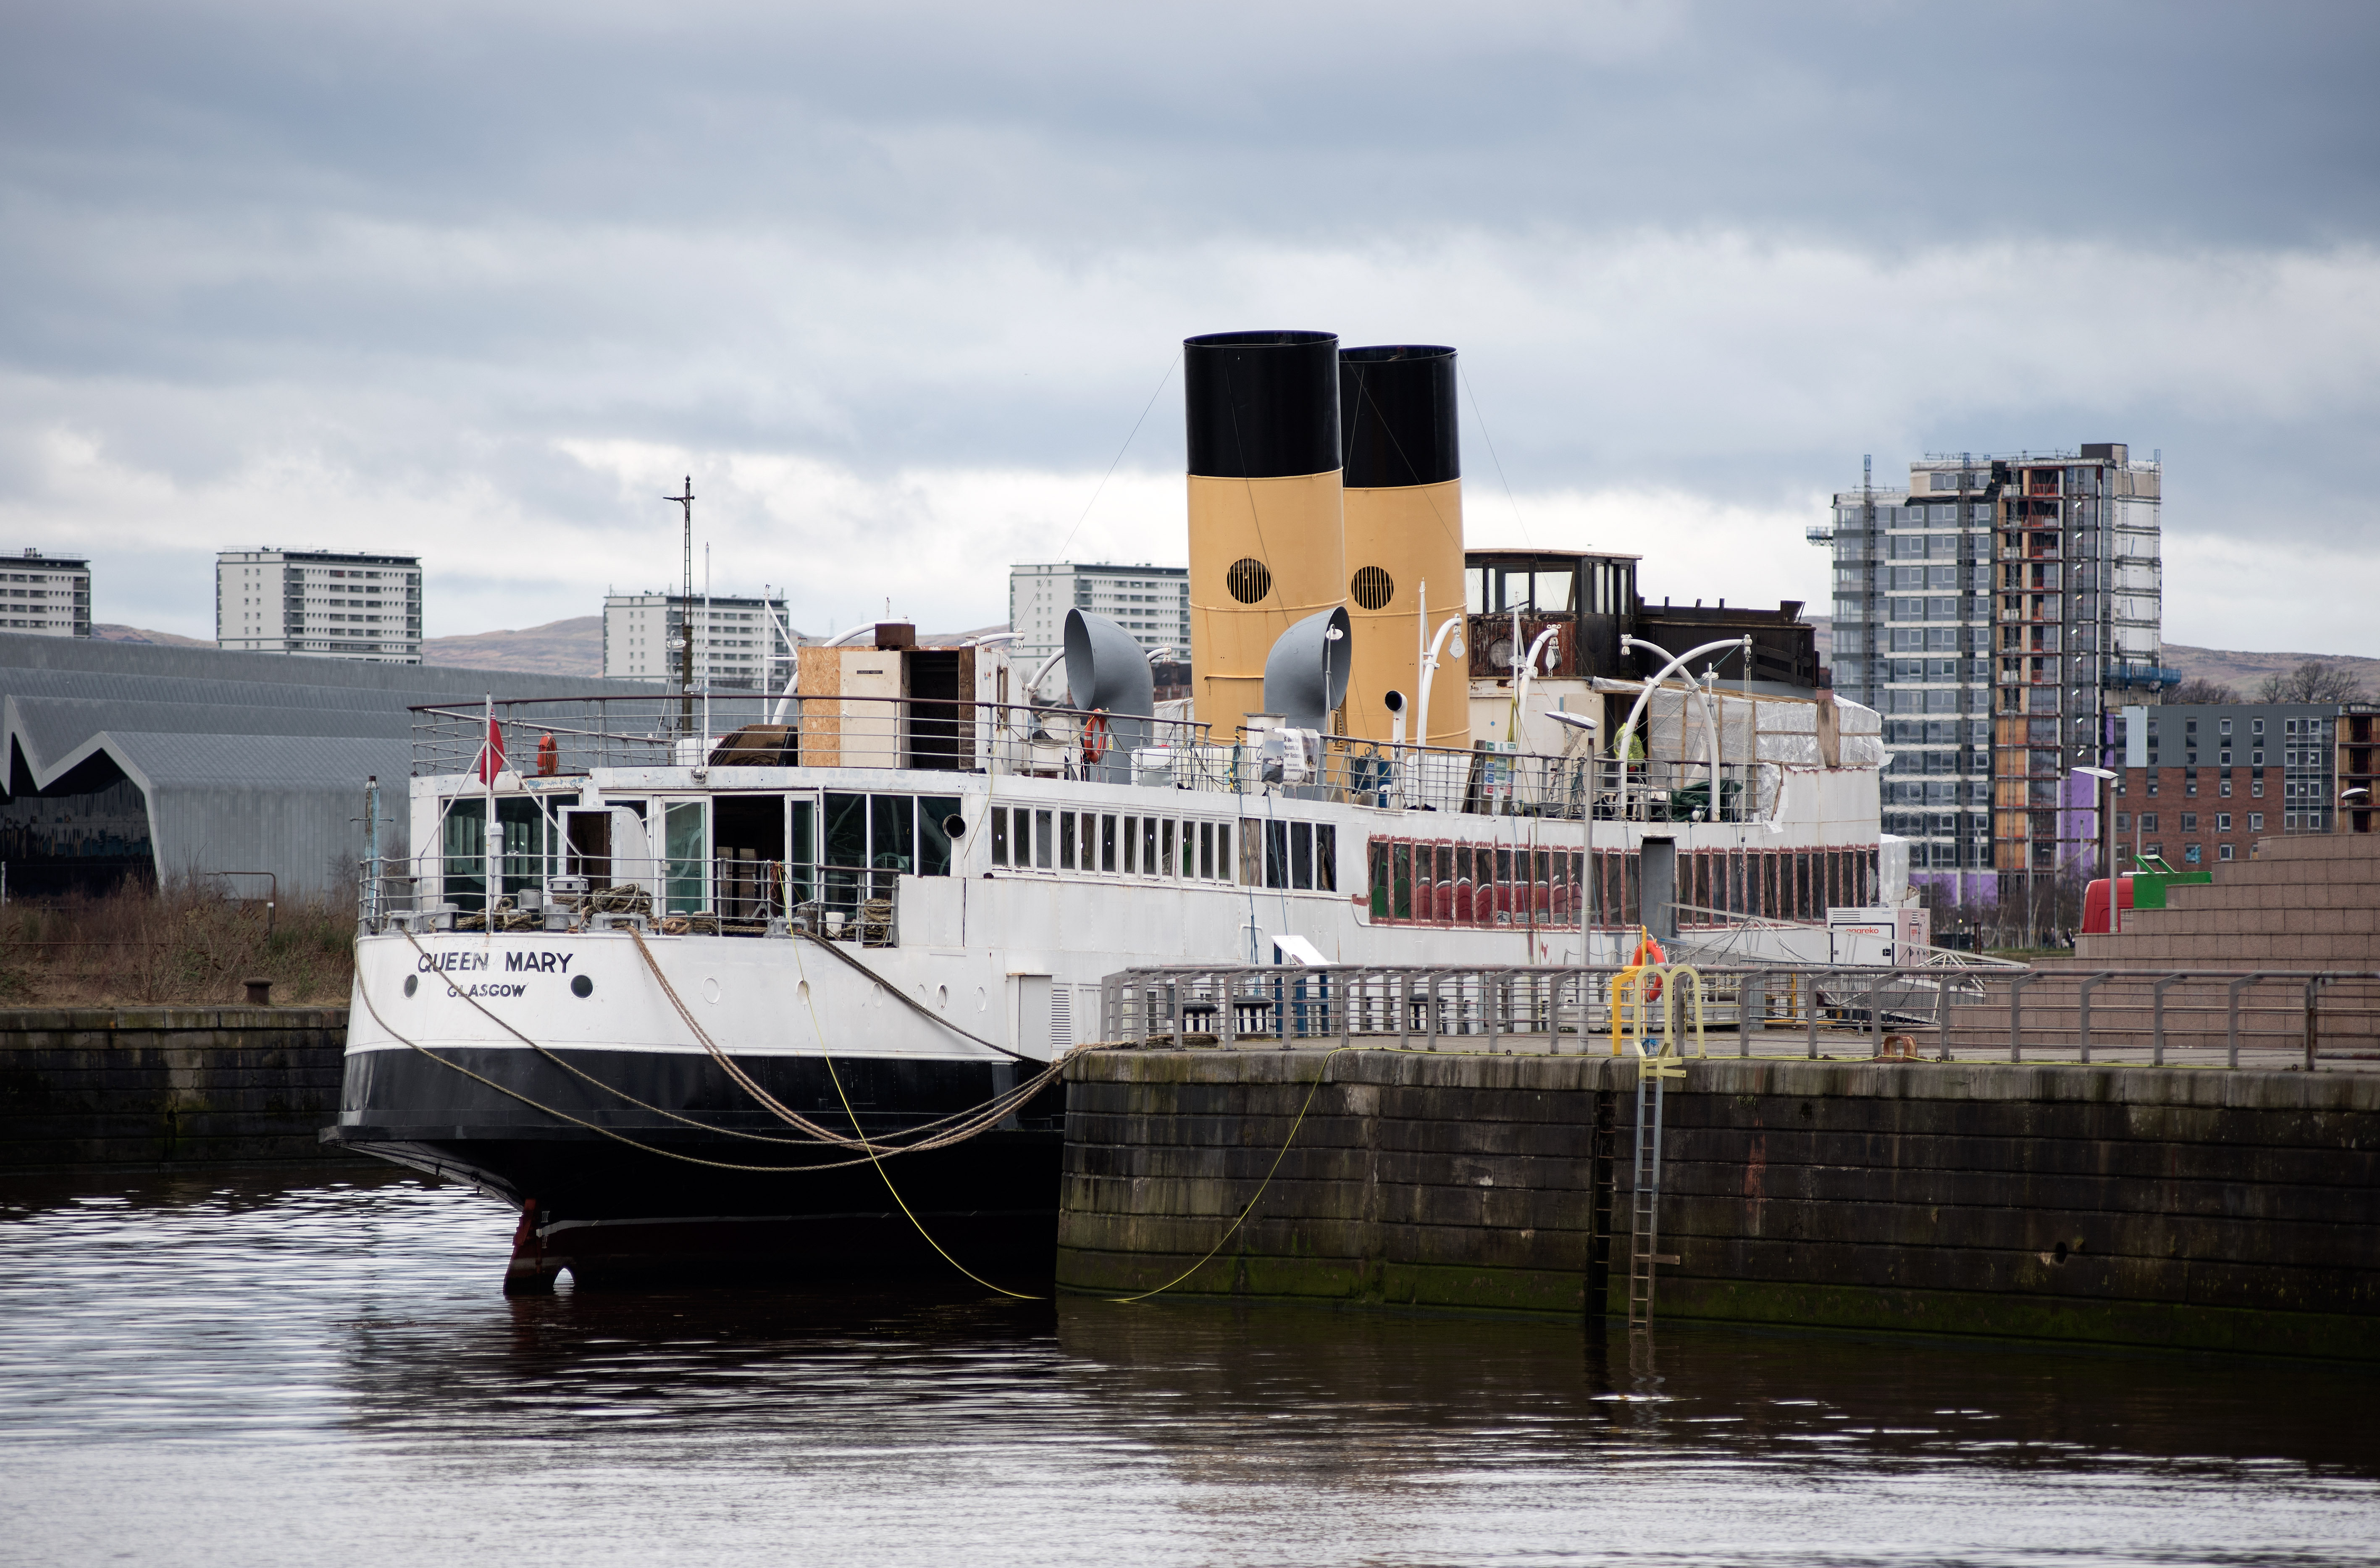 Queen Mary berthed at the Glasgow Science Centre